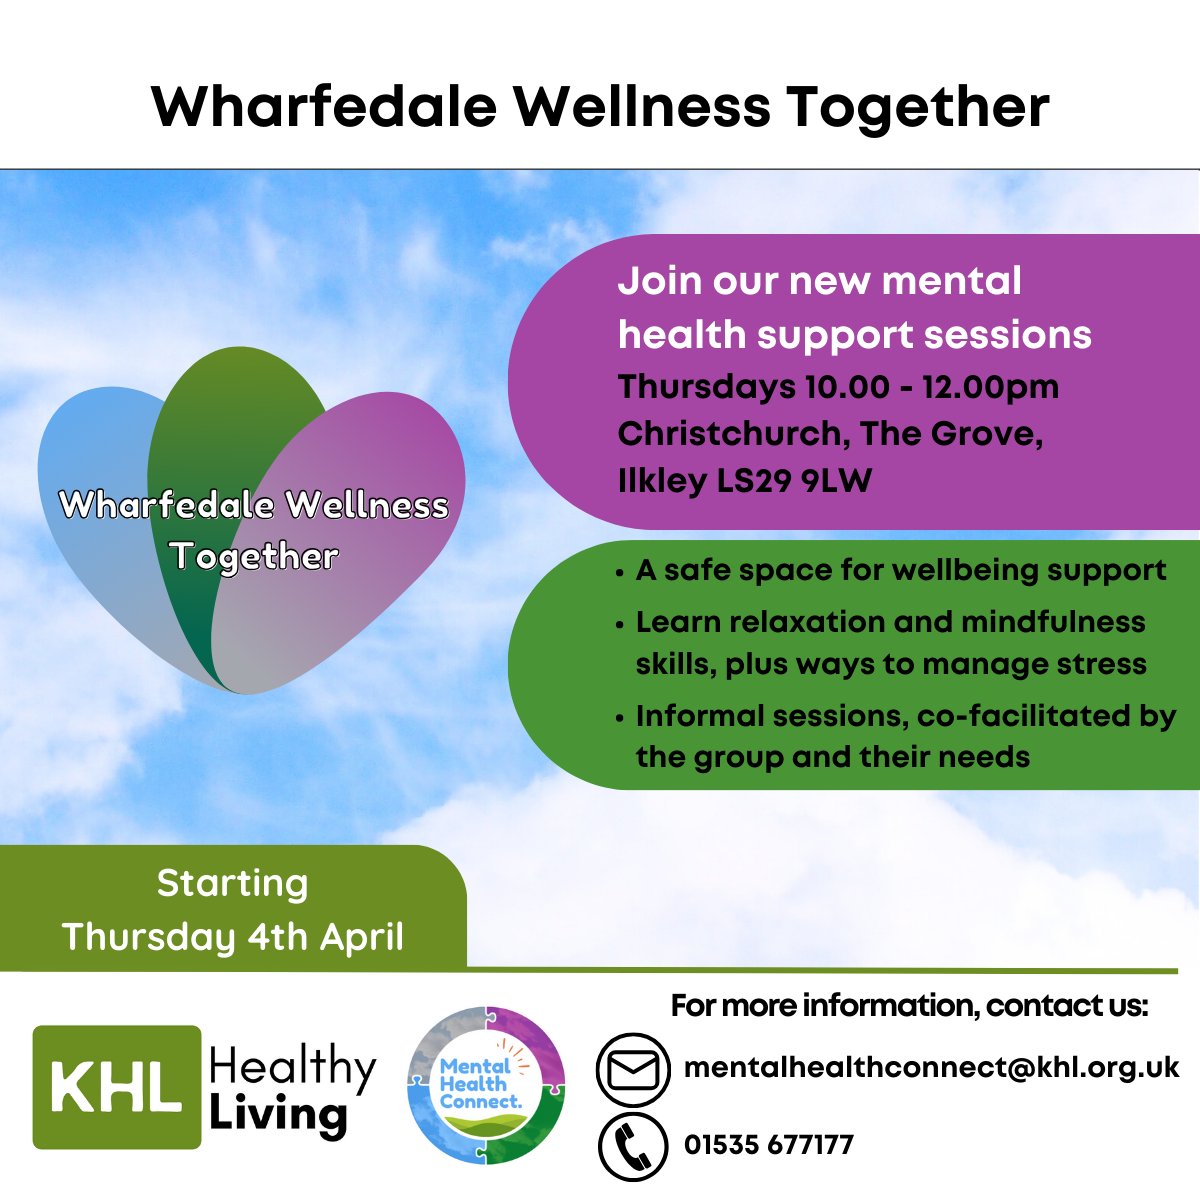 Don't forget! The our Wharfedale Wellness Together sessions start tomorrow in #Ilkley Join us at Christchurch 10-12pm - just drop in! @healthymindsbdc @IlkleyChat